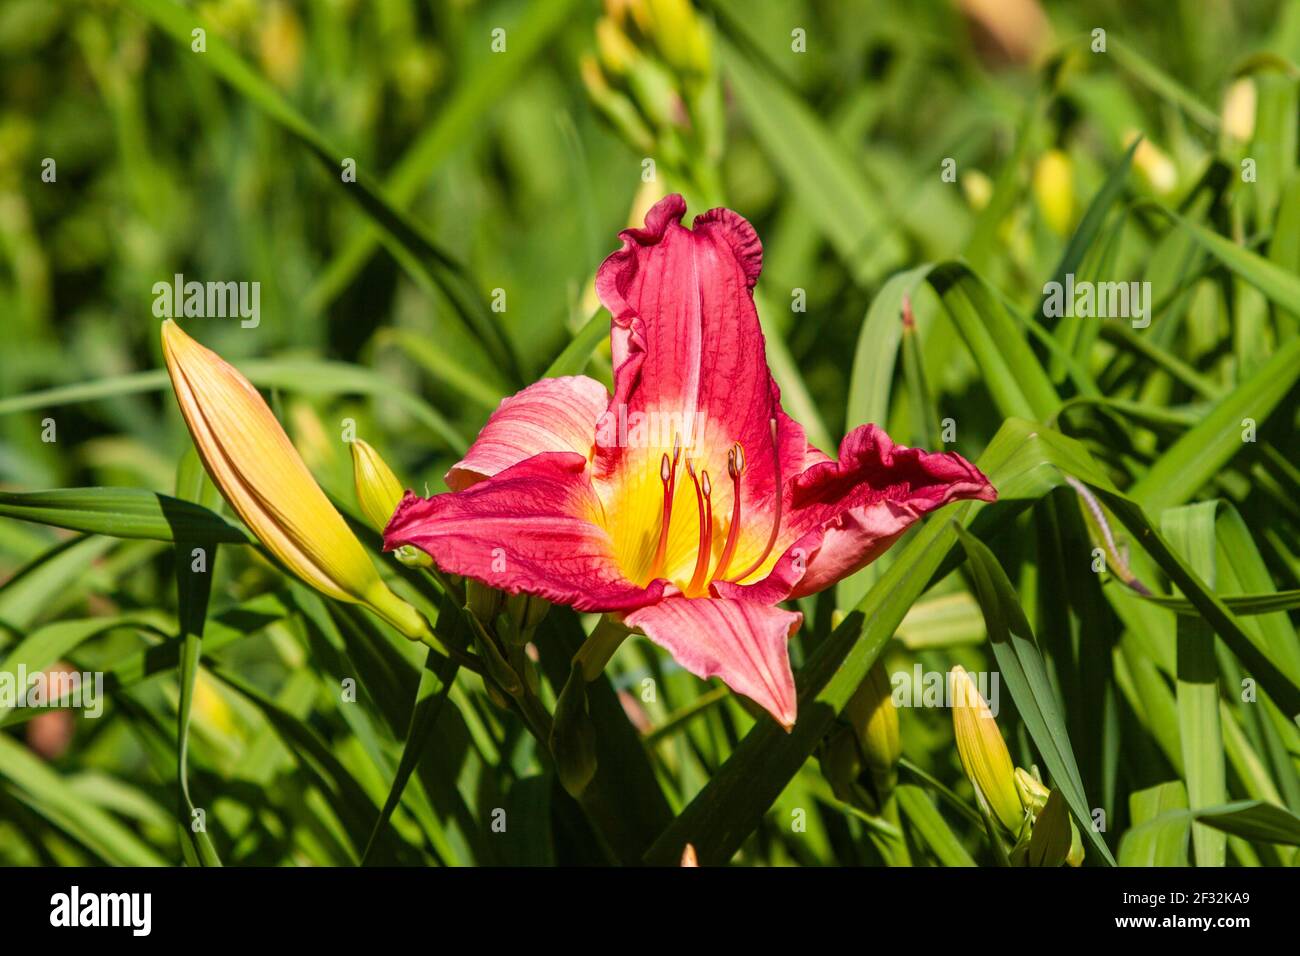 Daylily at Mercer Arboretum and Botanical Gardens in Spring, Texas. Stock Photo